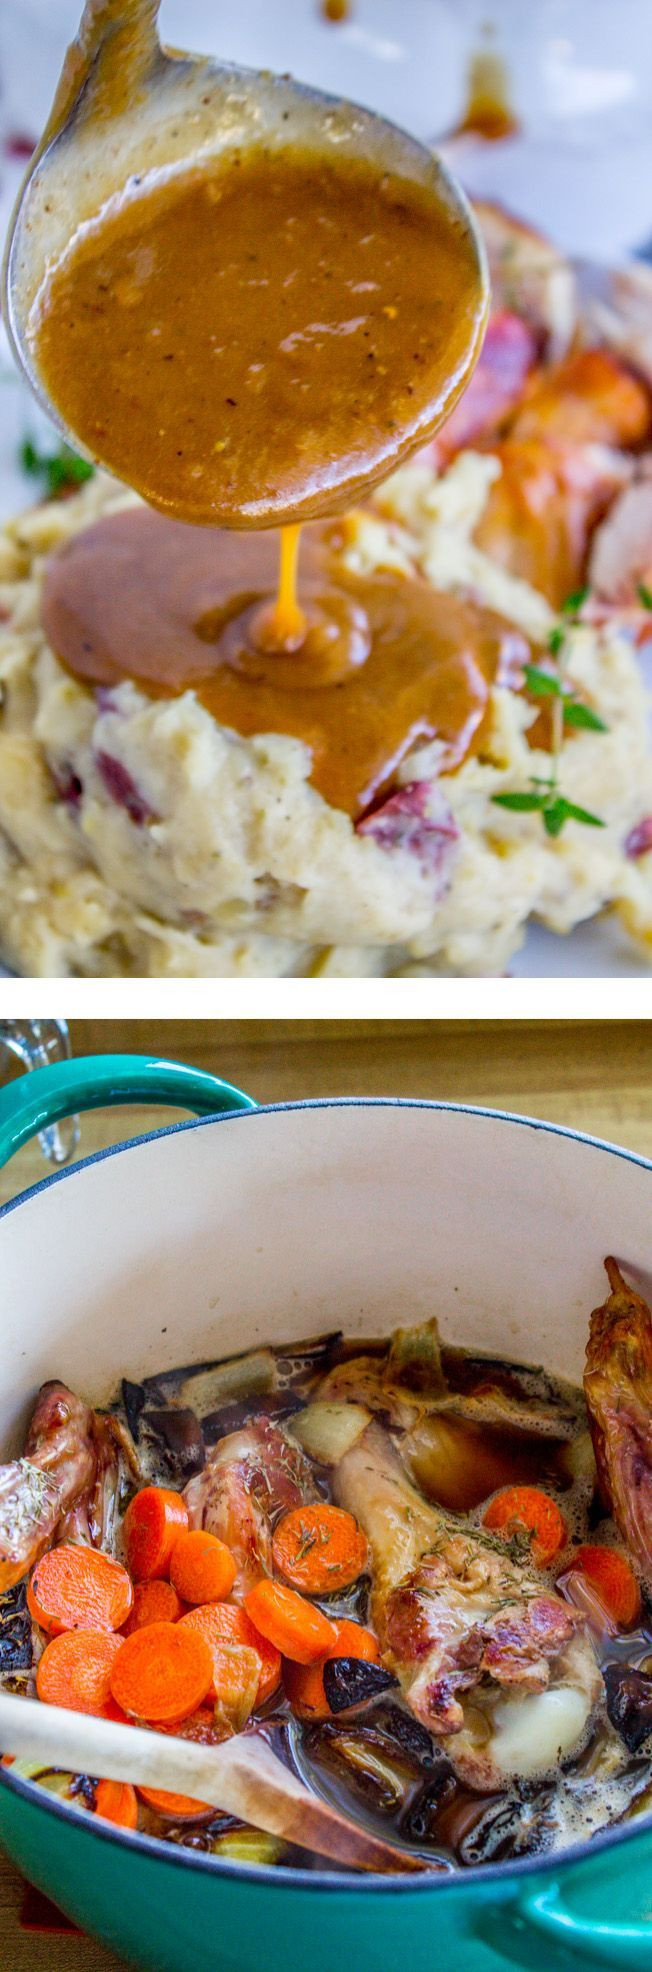 Make Ahead Gravy For Thanksgiving
 Best 25 Feast of tabernacles ideas on Pinterest